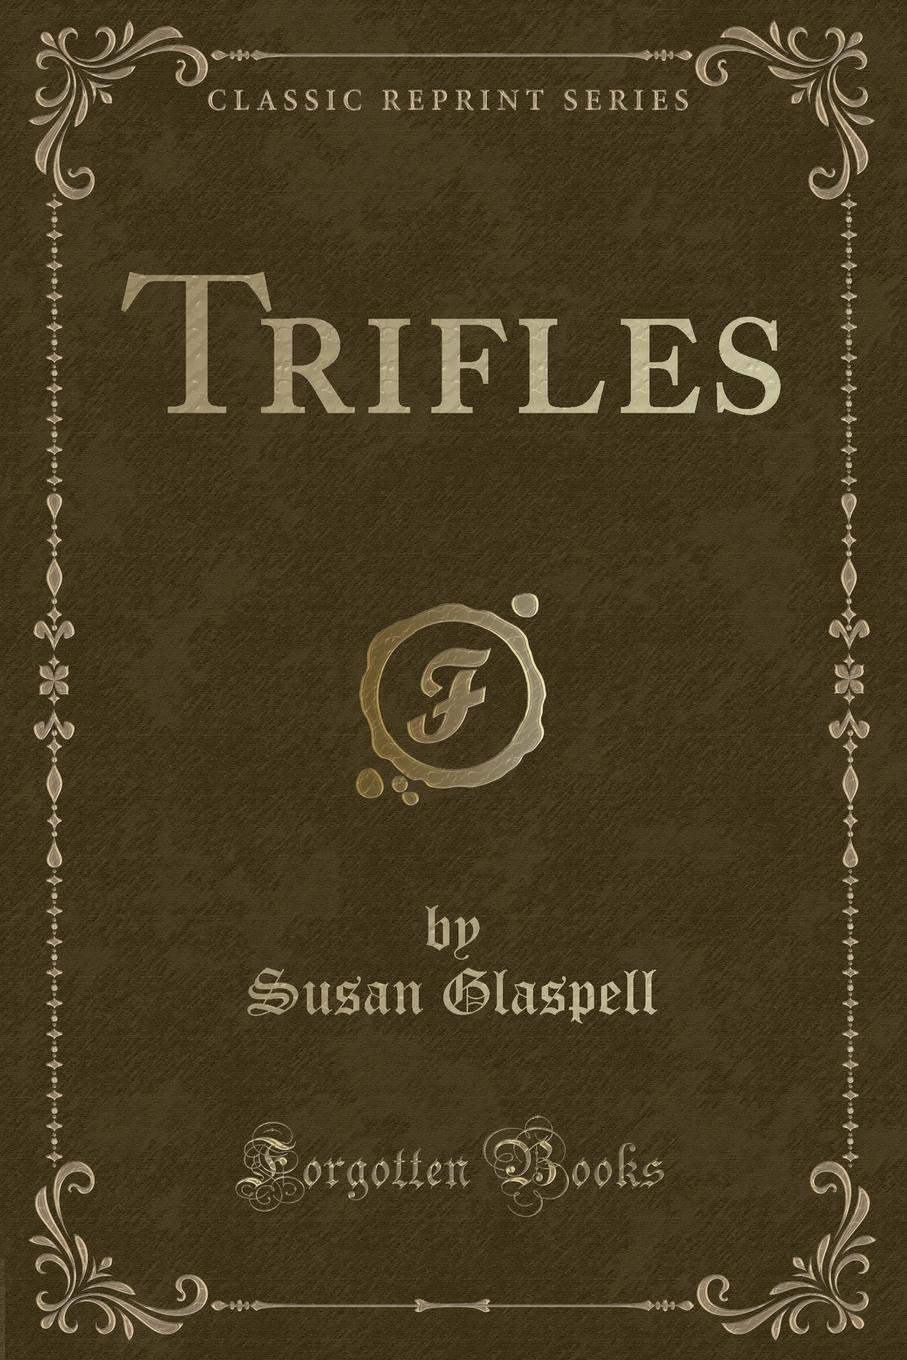 The name Trifles and its significance